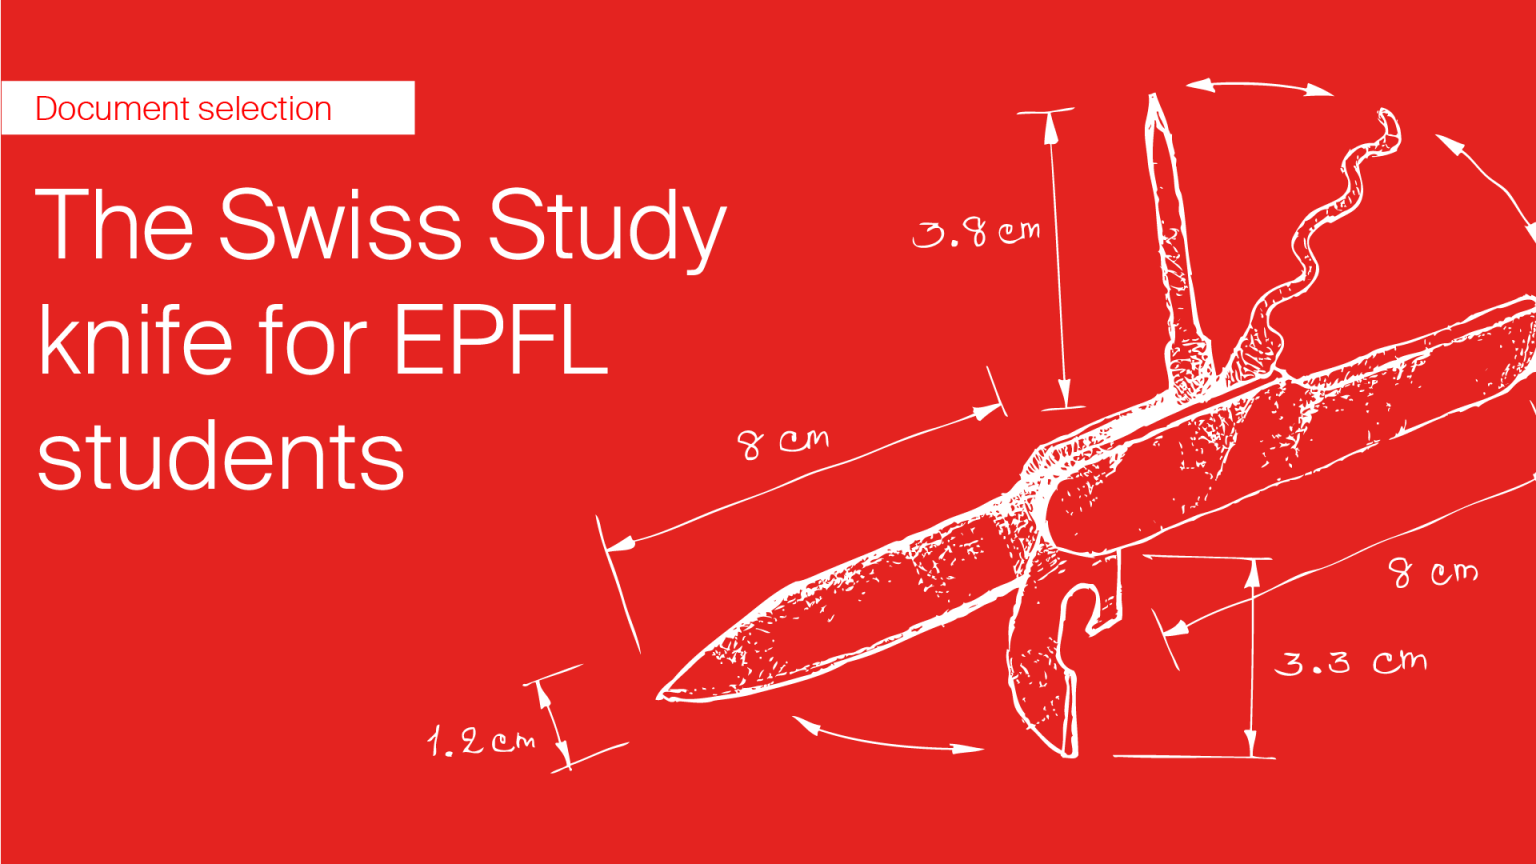 The Swiss Study knife for EPFL students